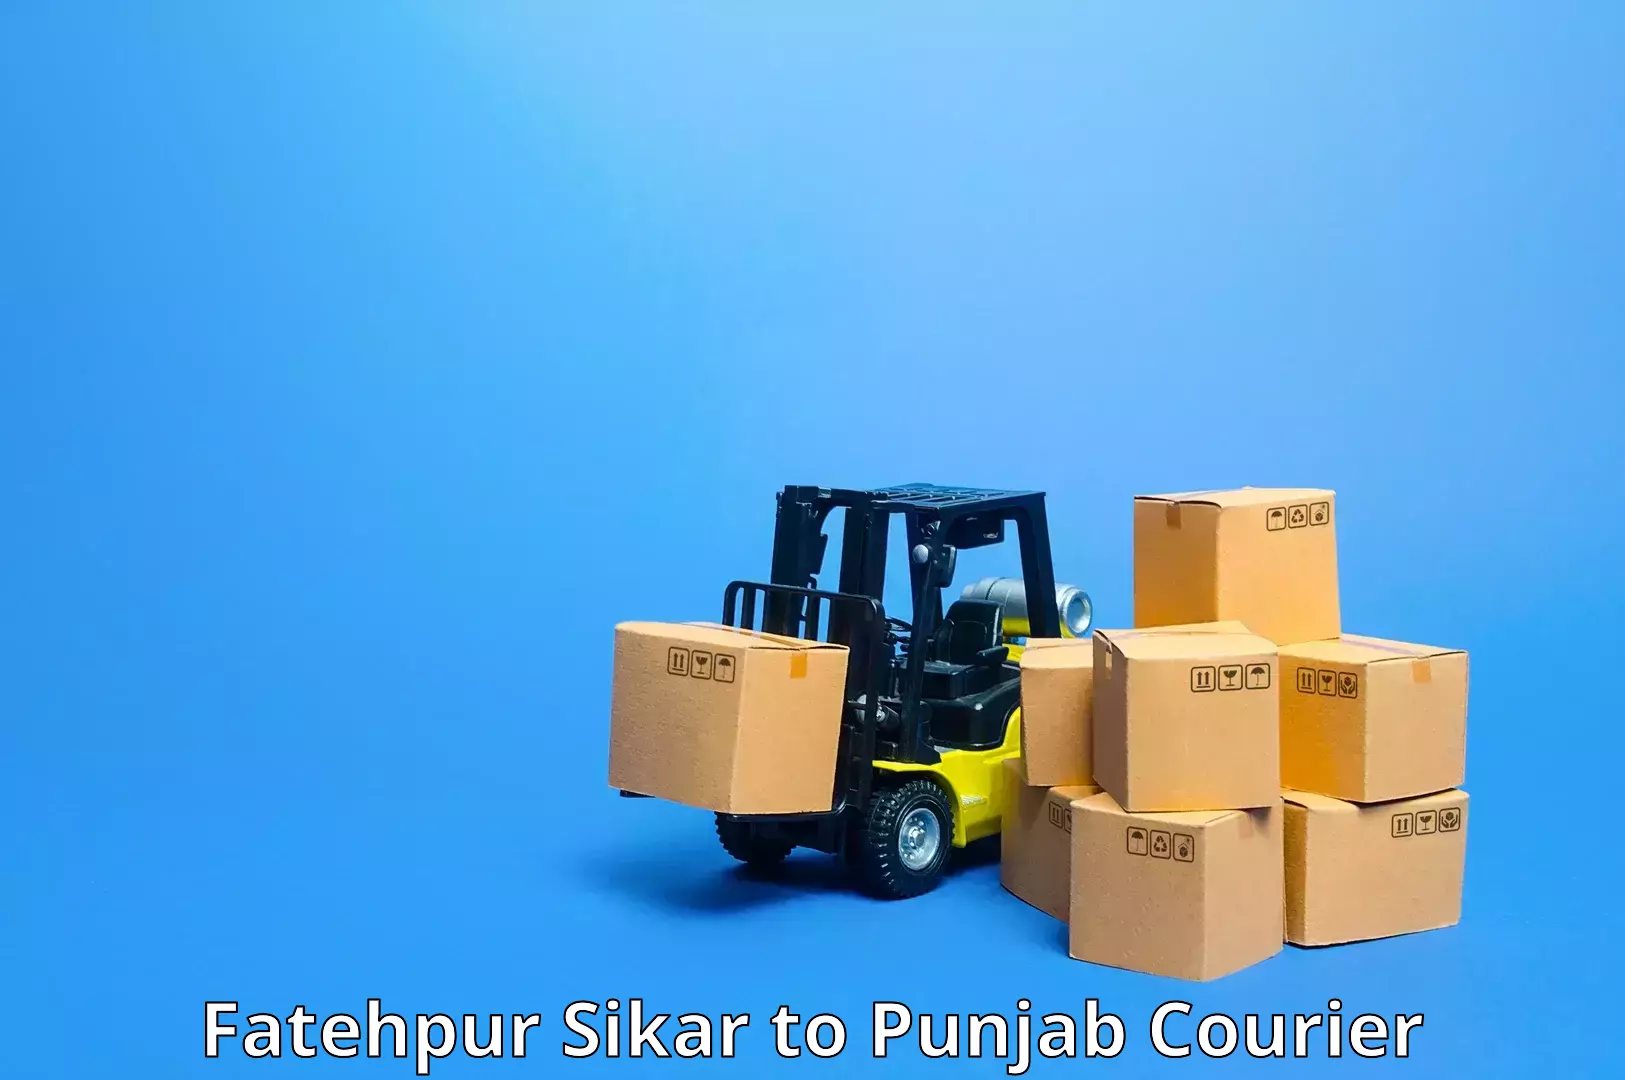 Large-scale shipping solutions Fatehpur Sikar to Talwandi Sabo